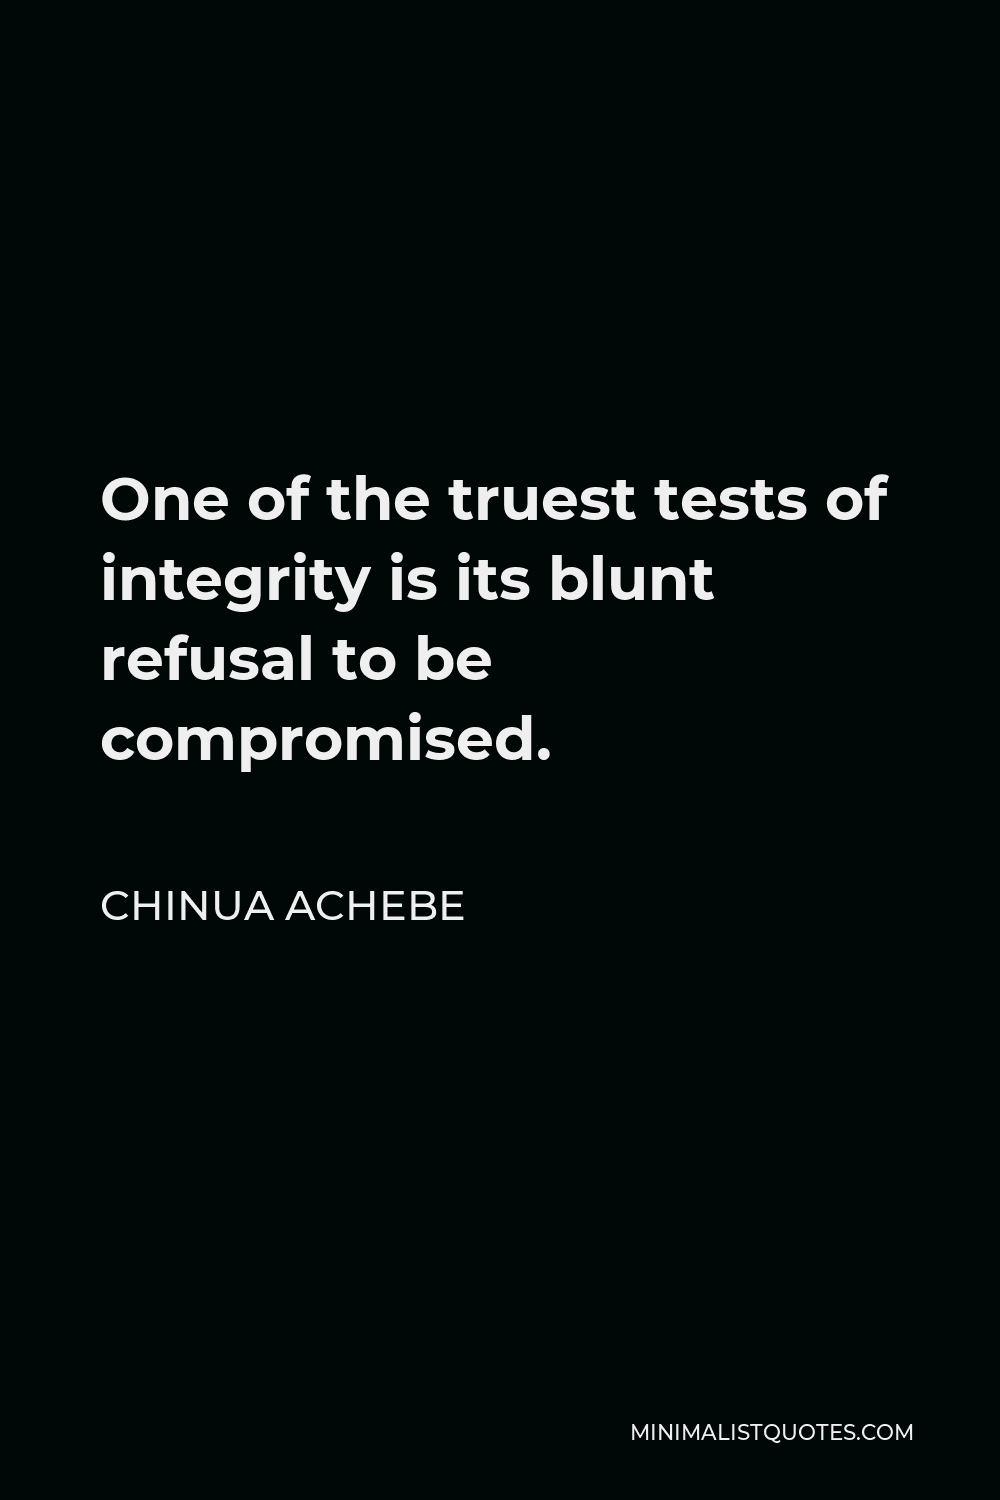 Chinua Achebe Quote - One of the truest tests of integrity is its blunt refusal to be compromised.